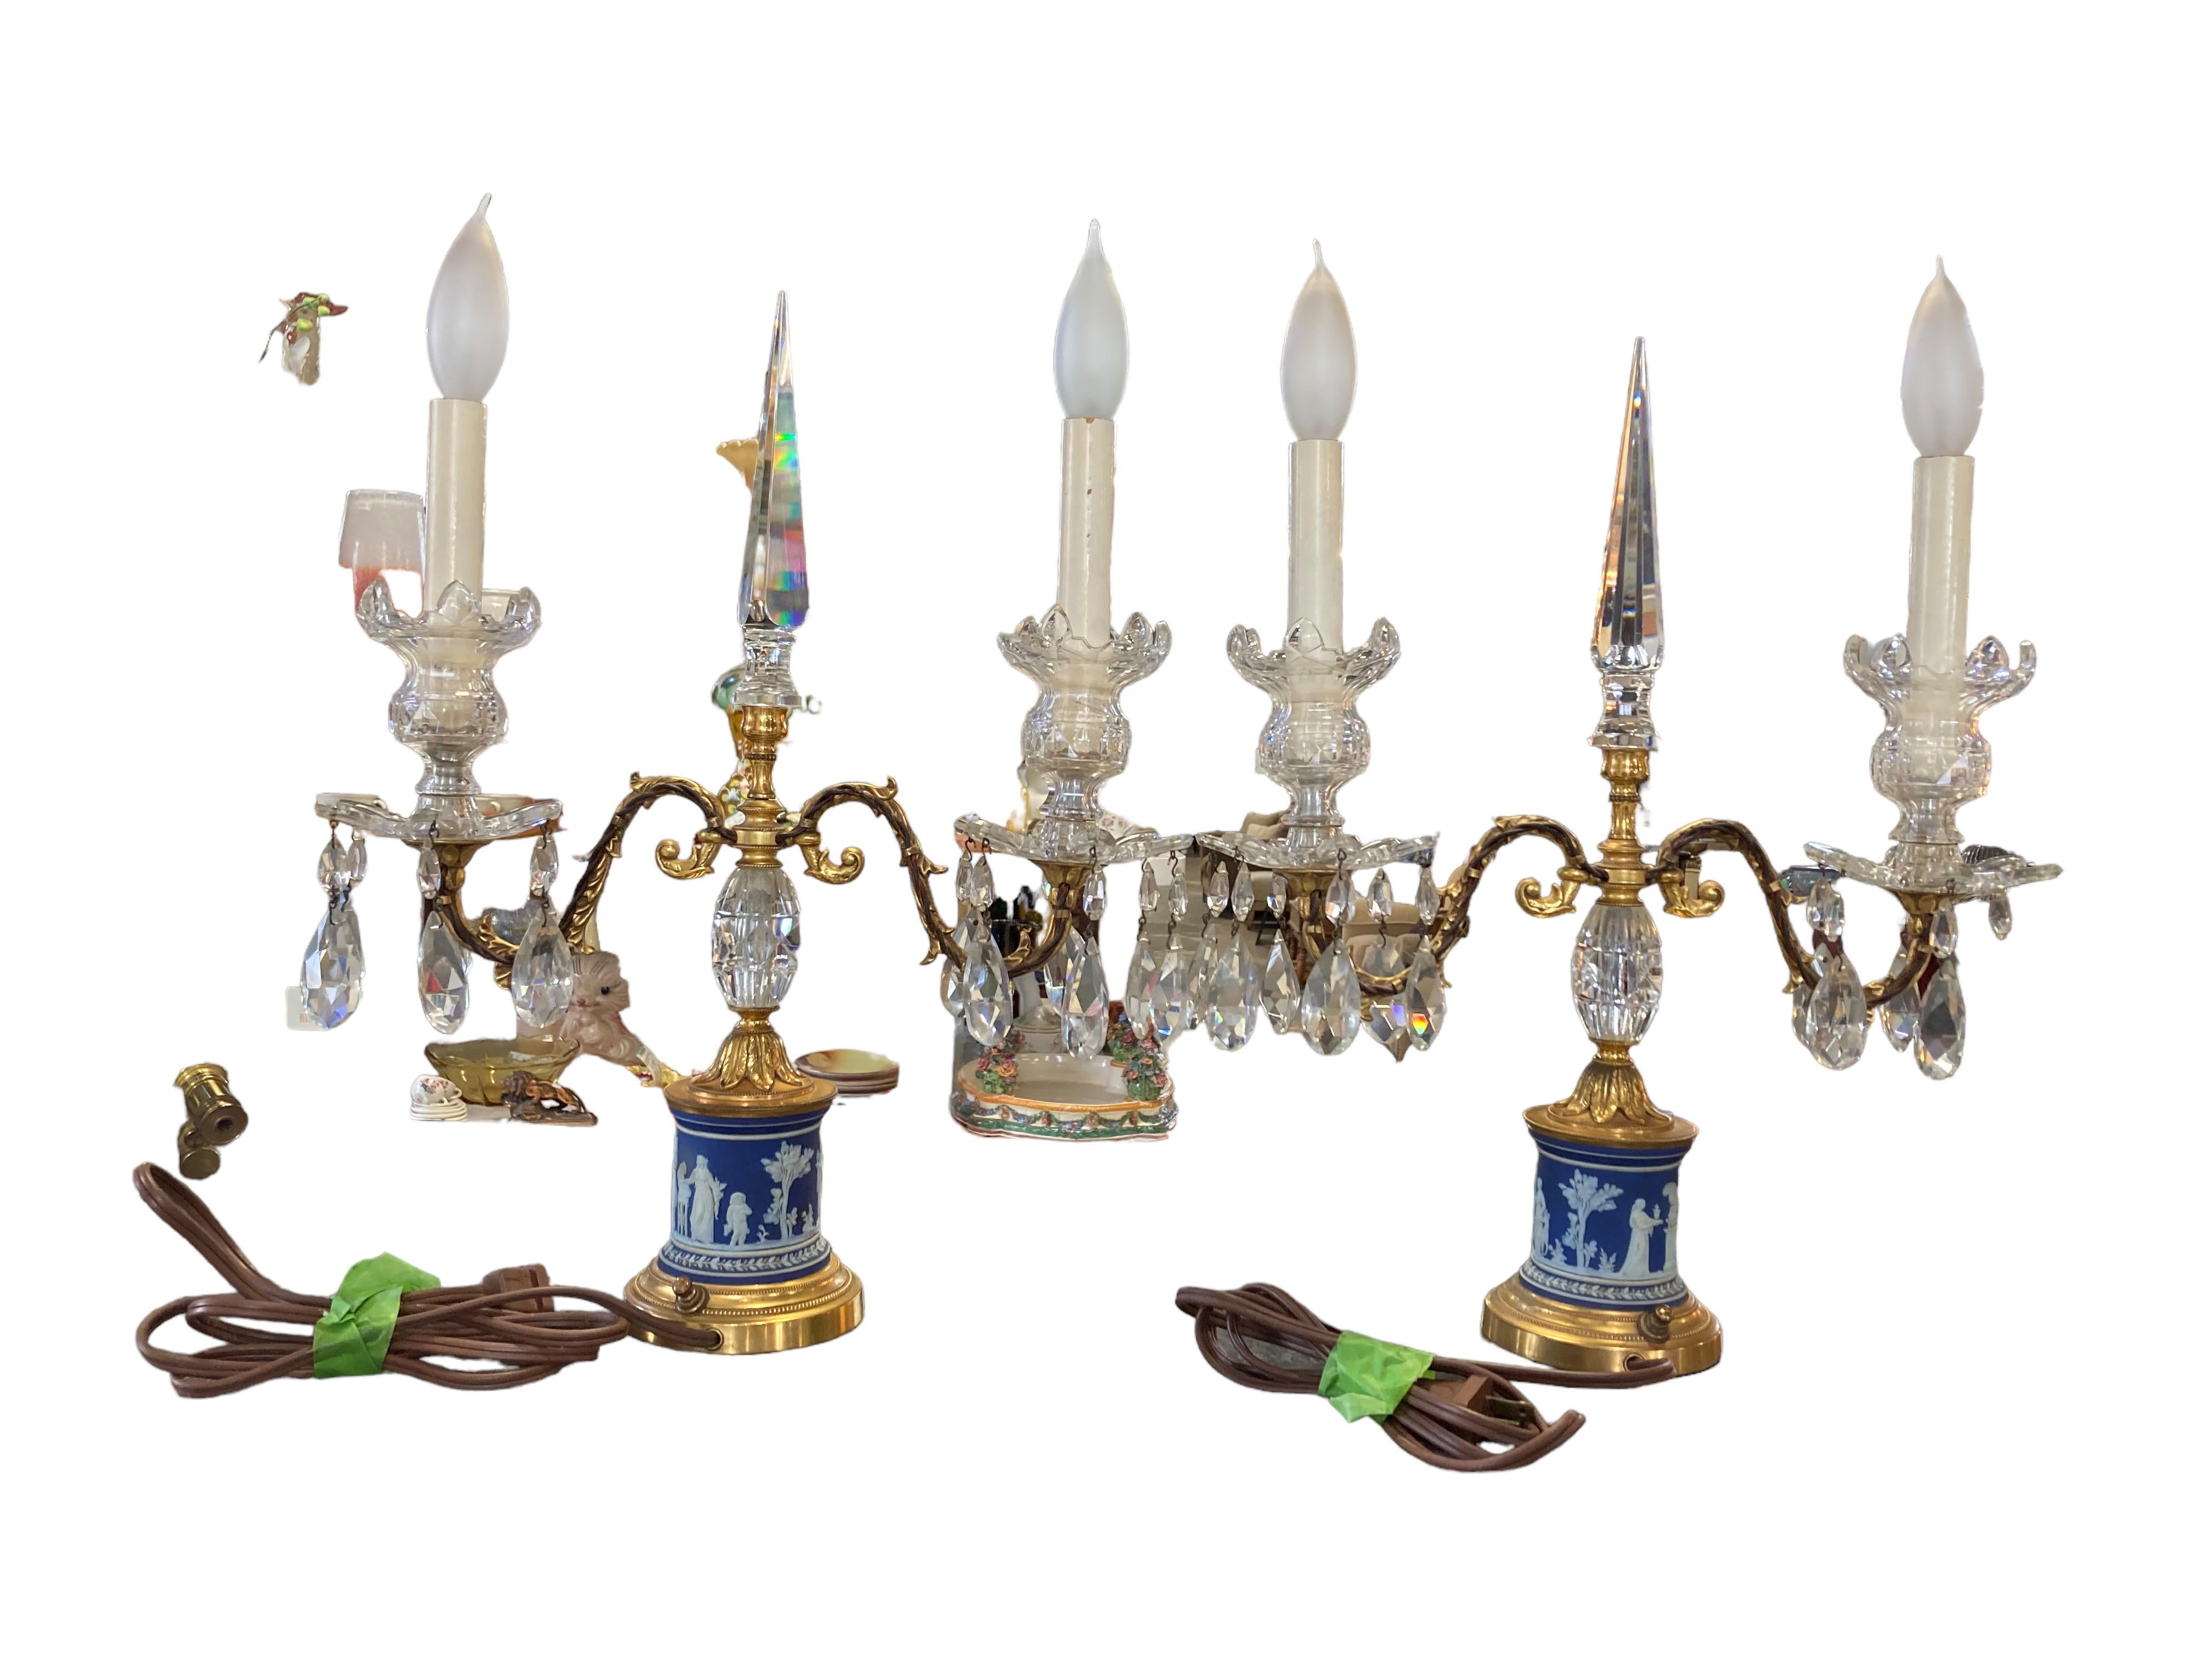 This elegant pair of lighted candelabras is comprised of Wedgwood porcelain, brass and crystal. The crystal spear at each center shines in a prism of colors in the light. The brass is in very good condition overall, as shown. There is one minor flea